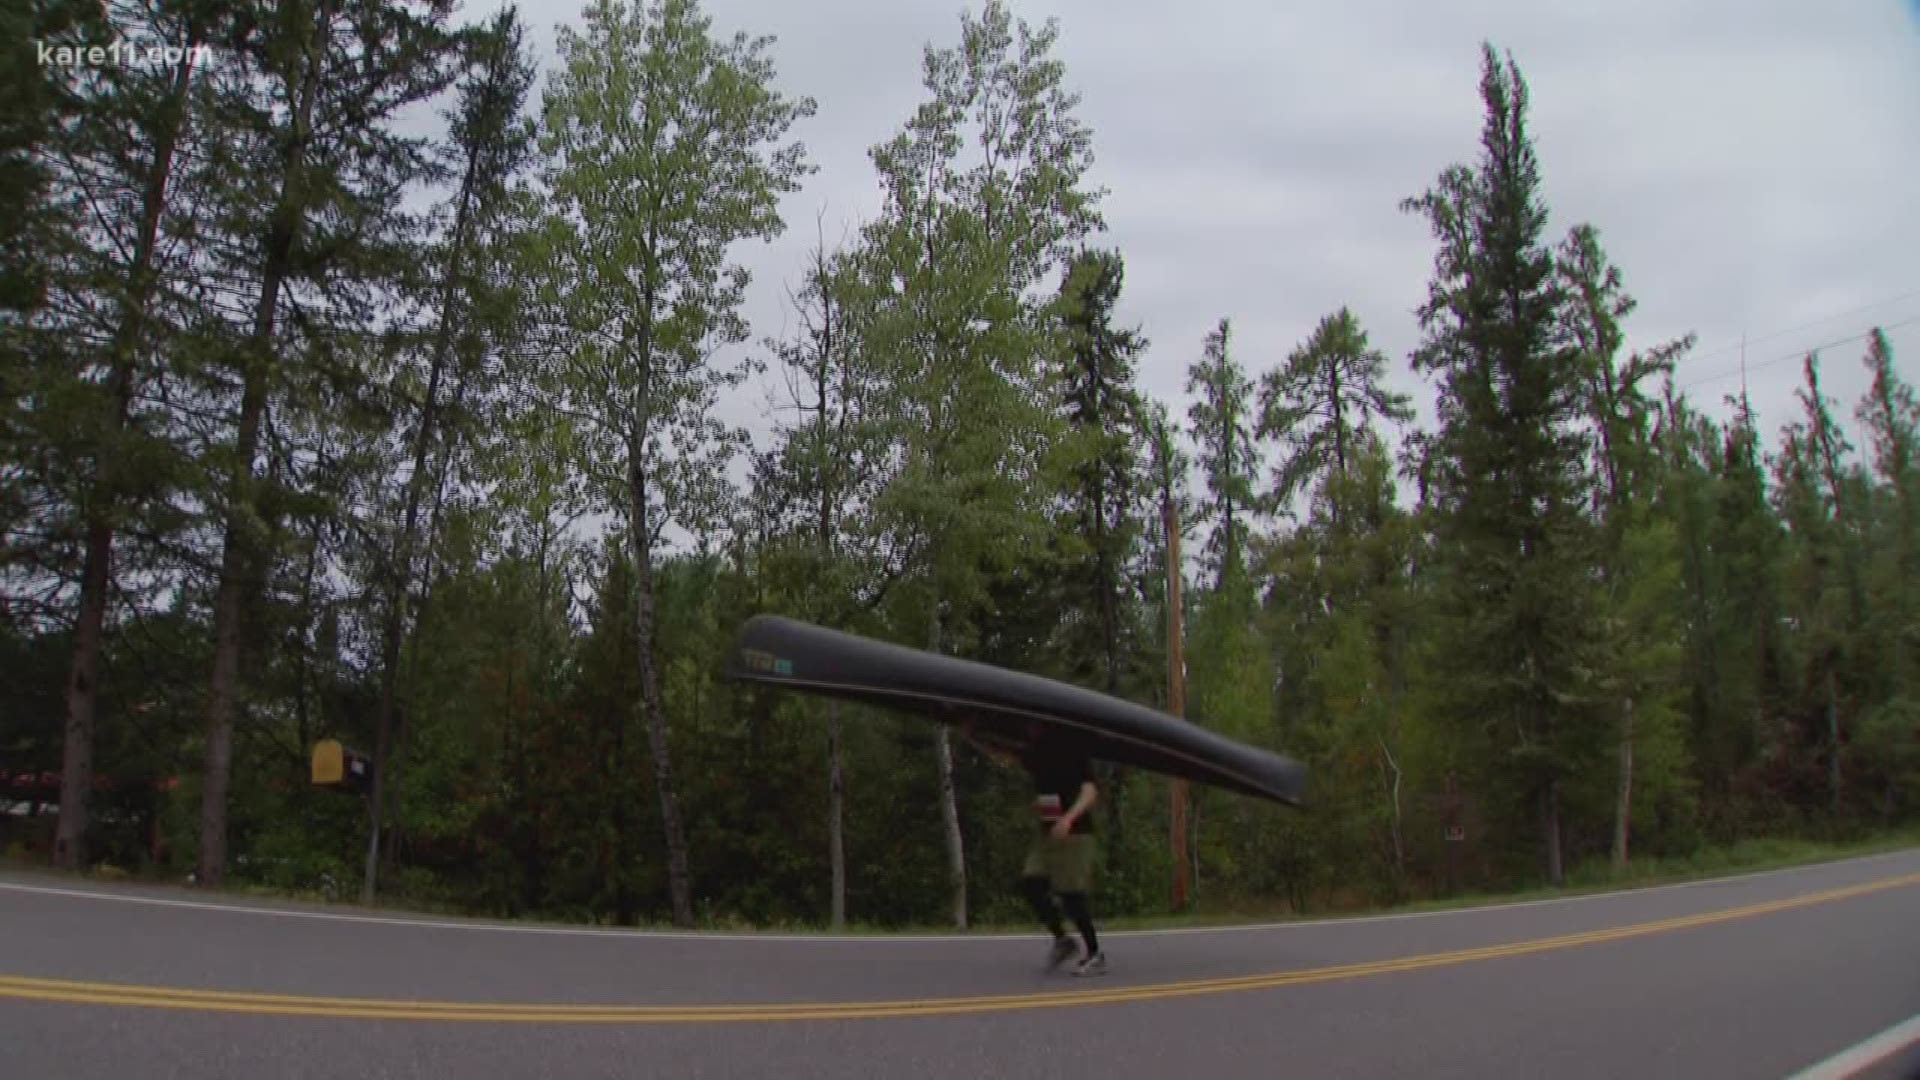 It's no small feat to run a marathon. Now, consider running a marathon while portaging a 35-pound canoe. KARE 11's Boyd Huppert takes us to the Ely Marathon for Land of 10,000 Stories. https://kare11.tv/2y8VPZE